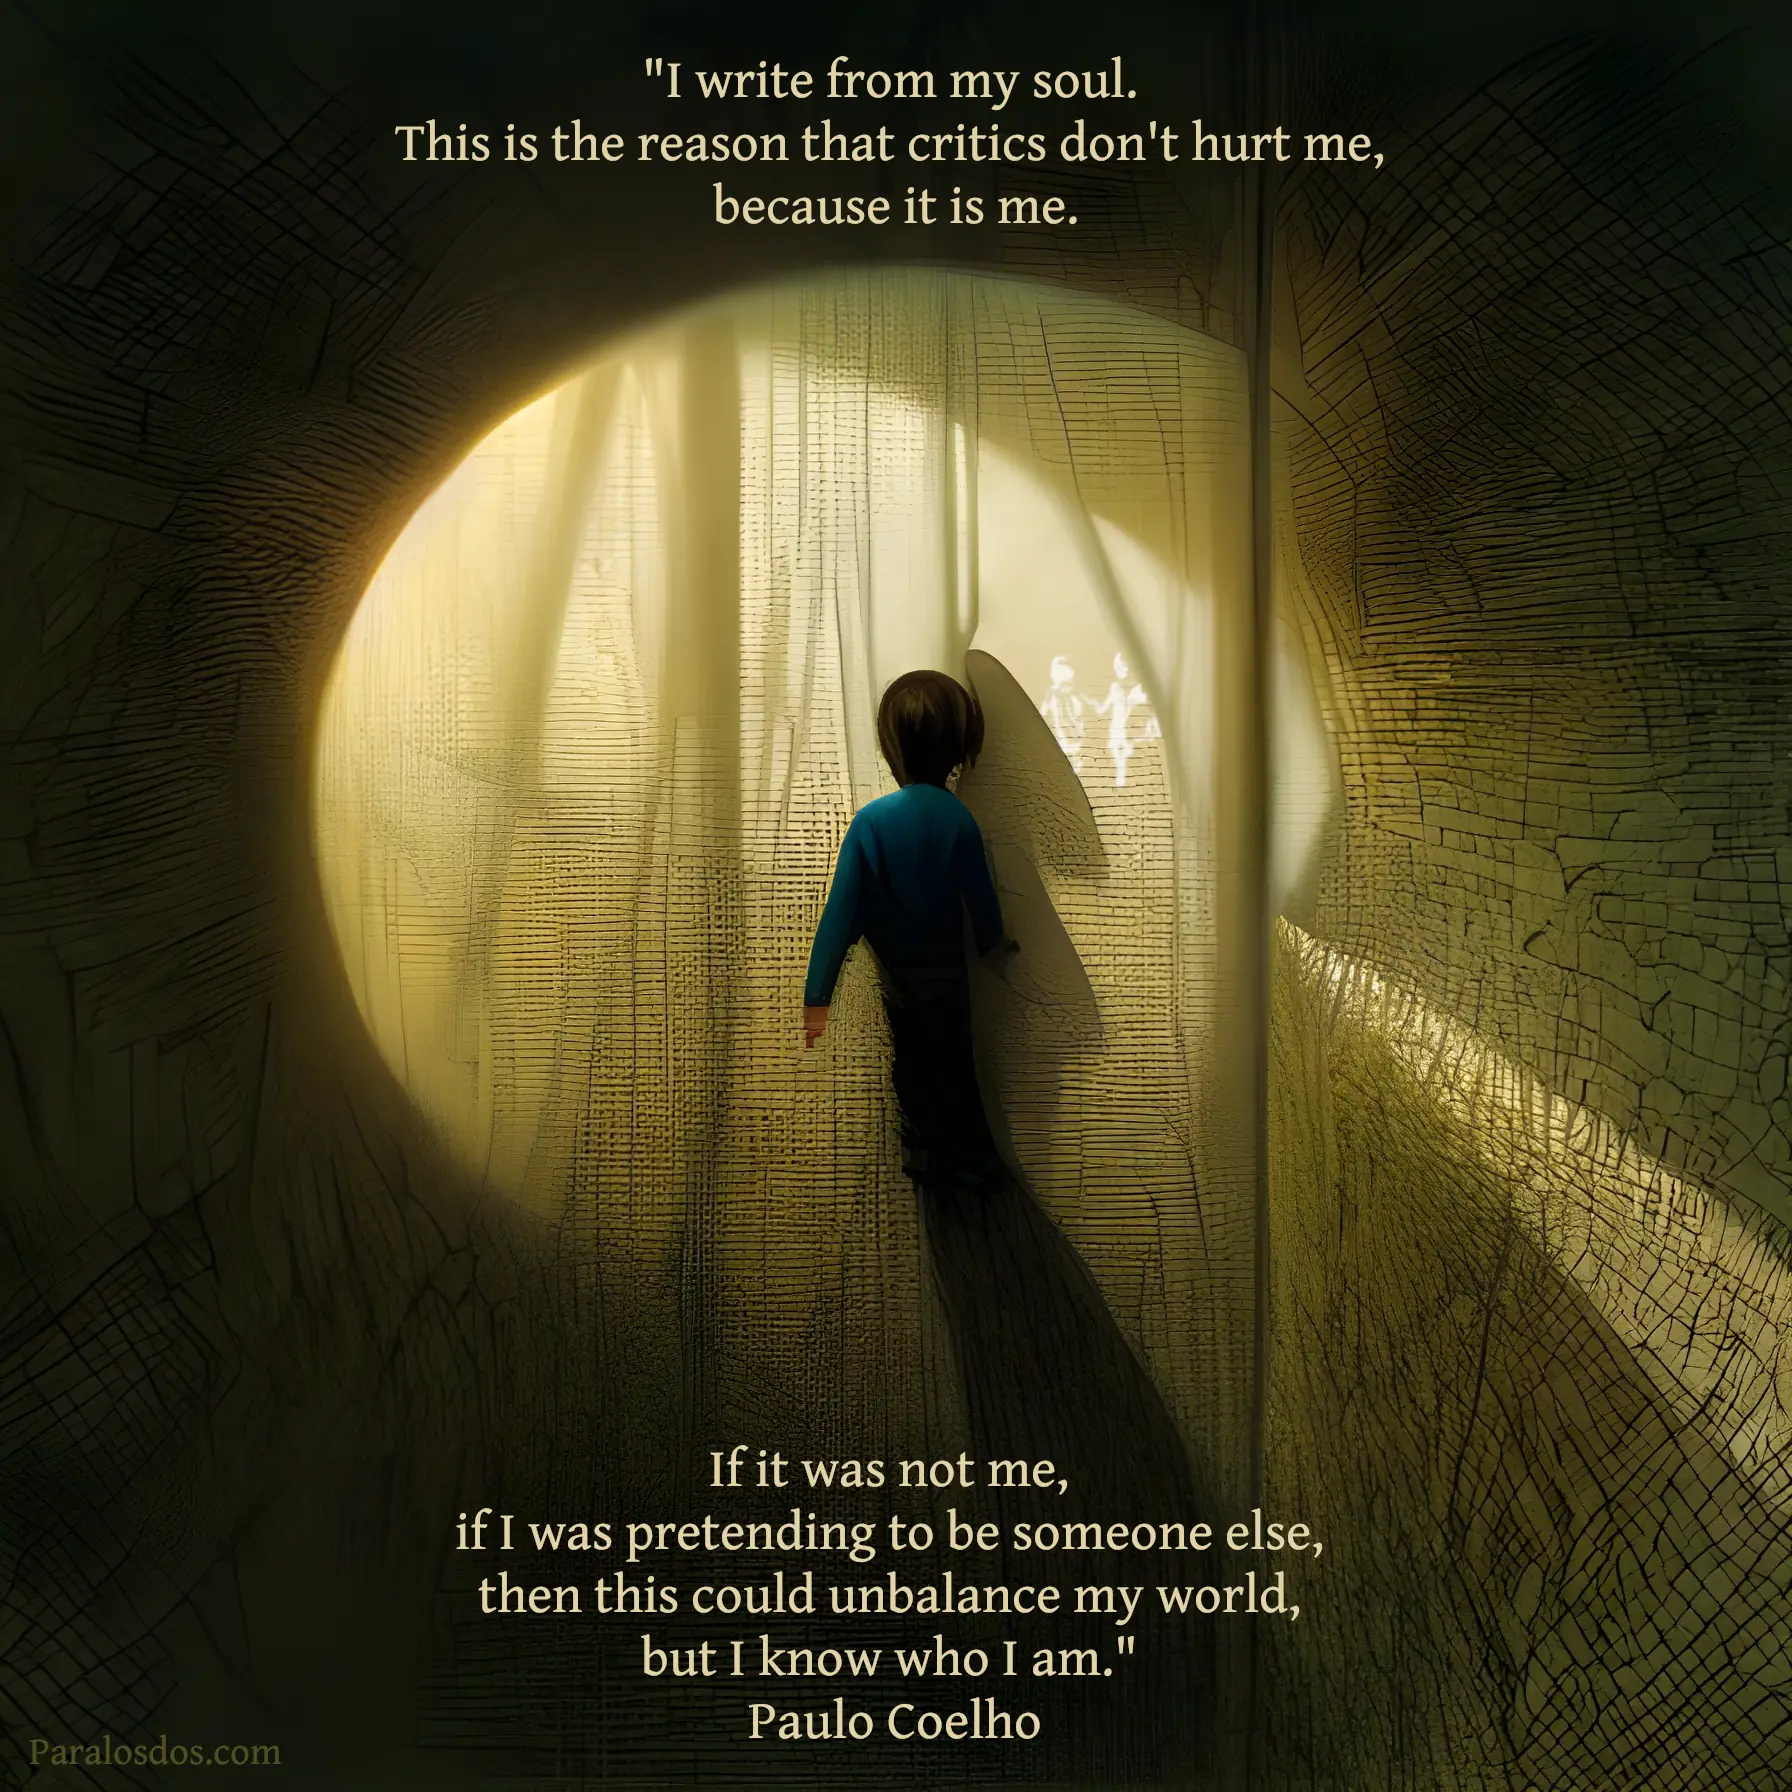 An artistic rendering of a figure in a shadowy woods about to walk into the light. The quote reads: "I write from my soul. This is the reason that critics don't hurt me, because it is me. If it was not me, if I was pretending to be someone else, then this could unbalance my world, but I know who I am." Paulo Coelho